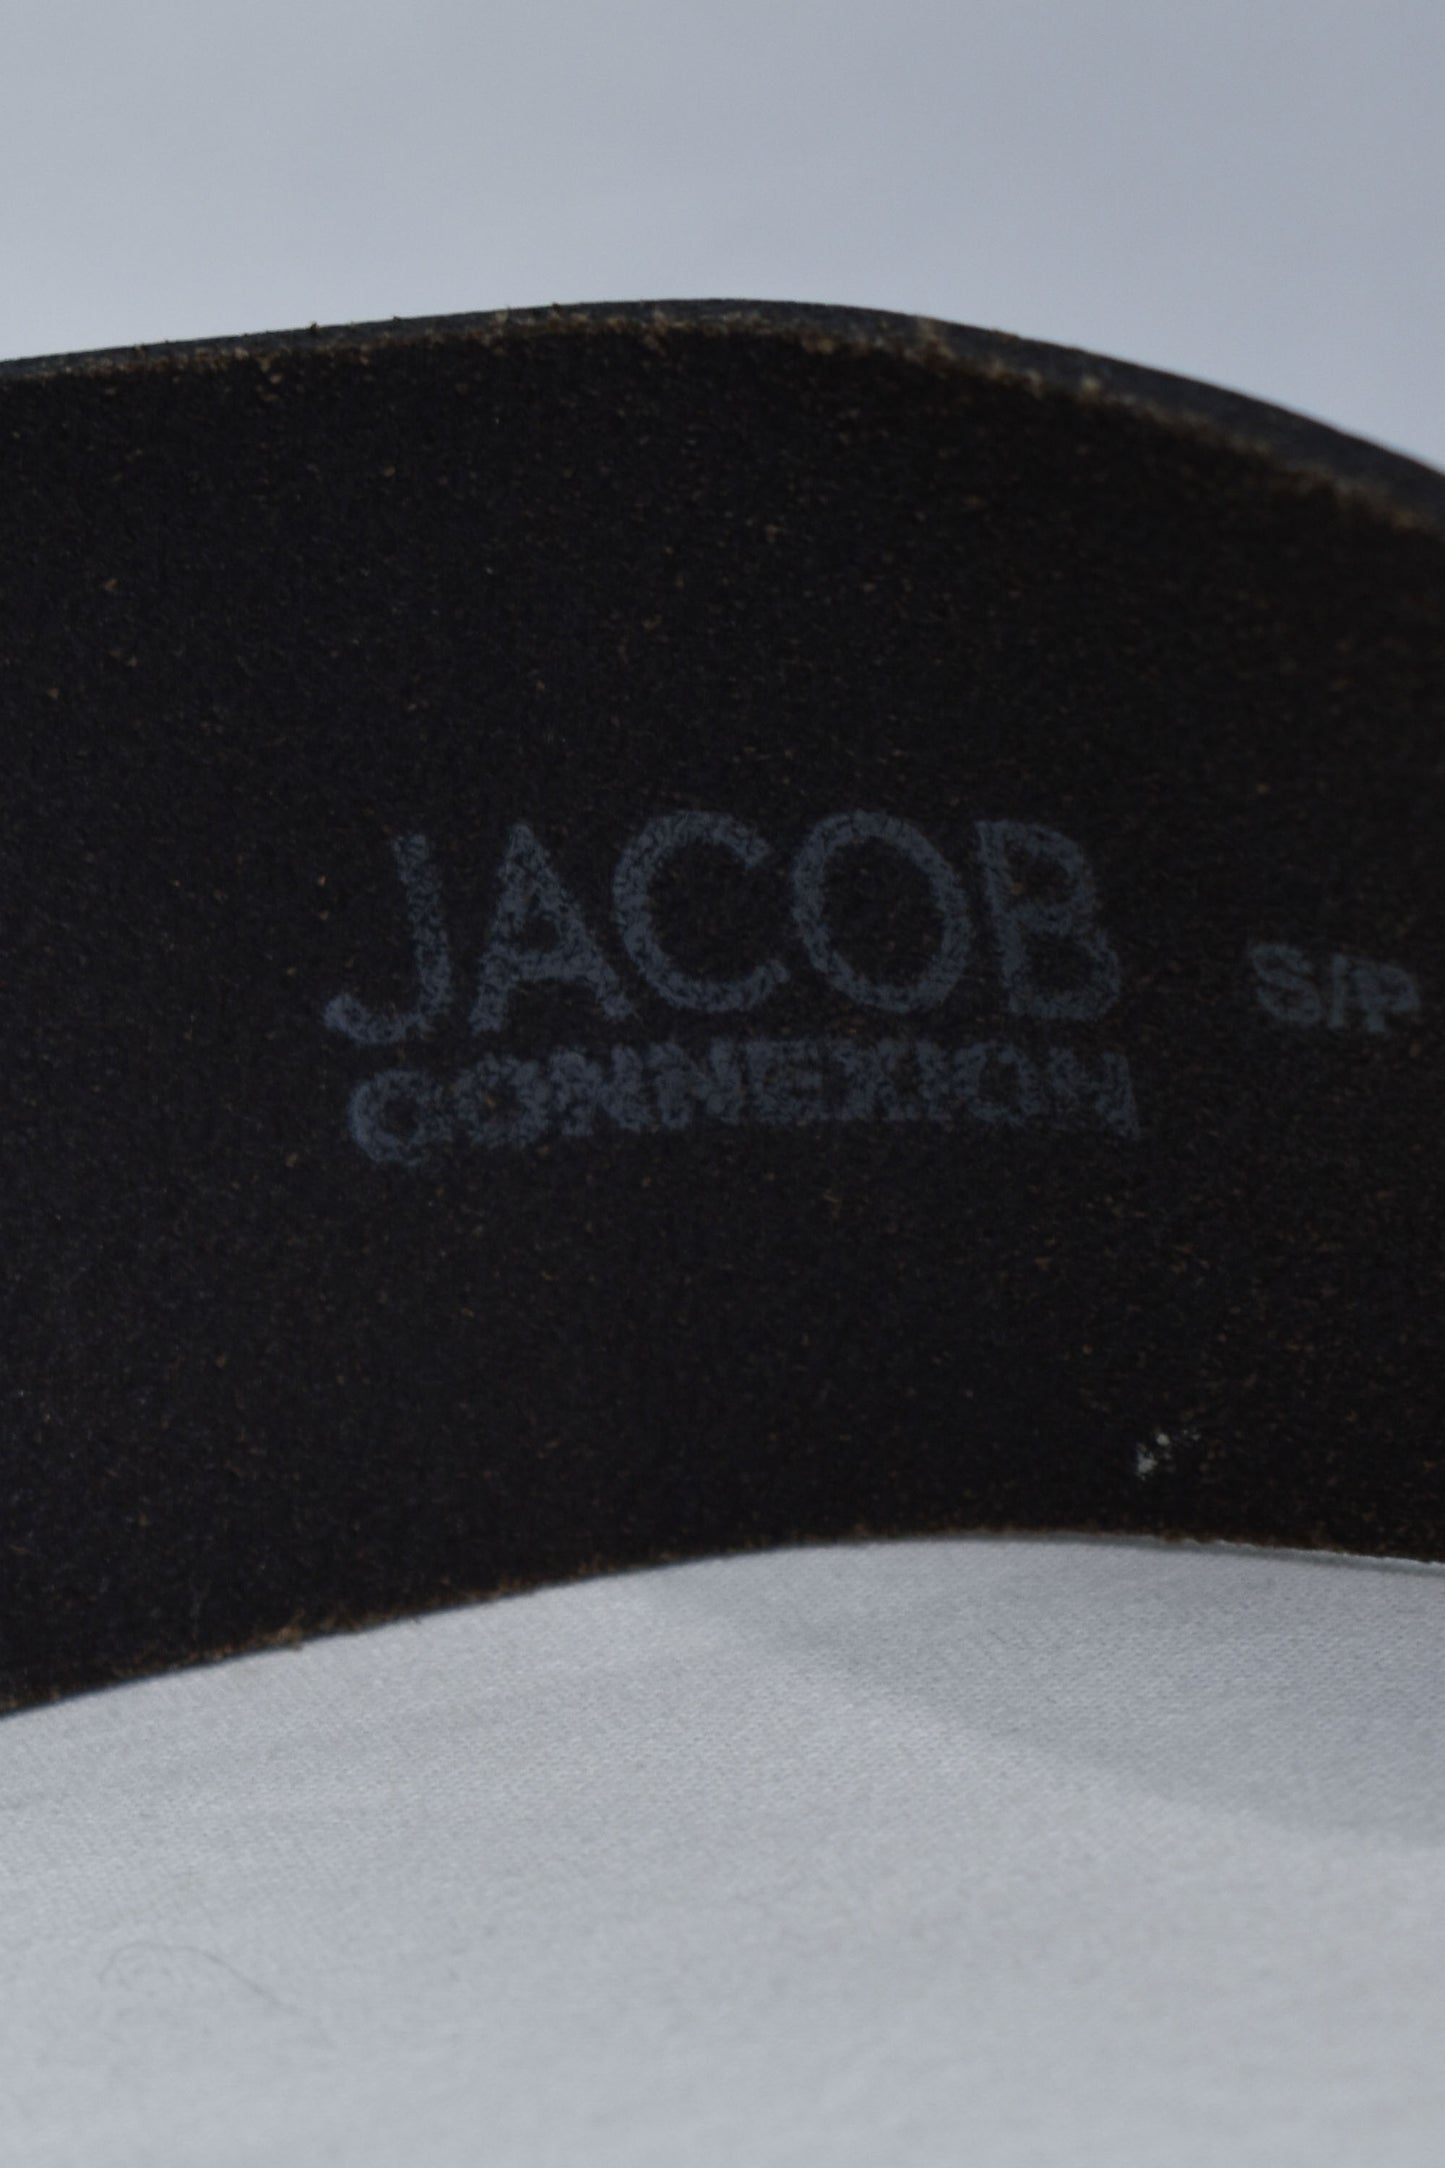 Vintage 90's "Jacob" Italian Leather Belt with Silver Buckle